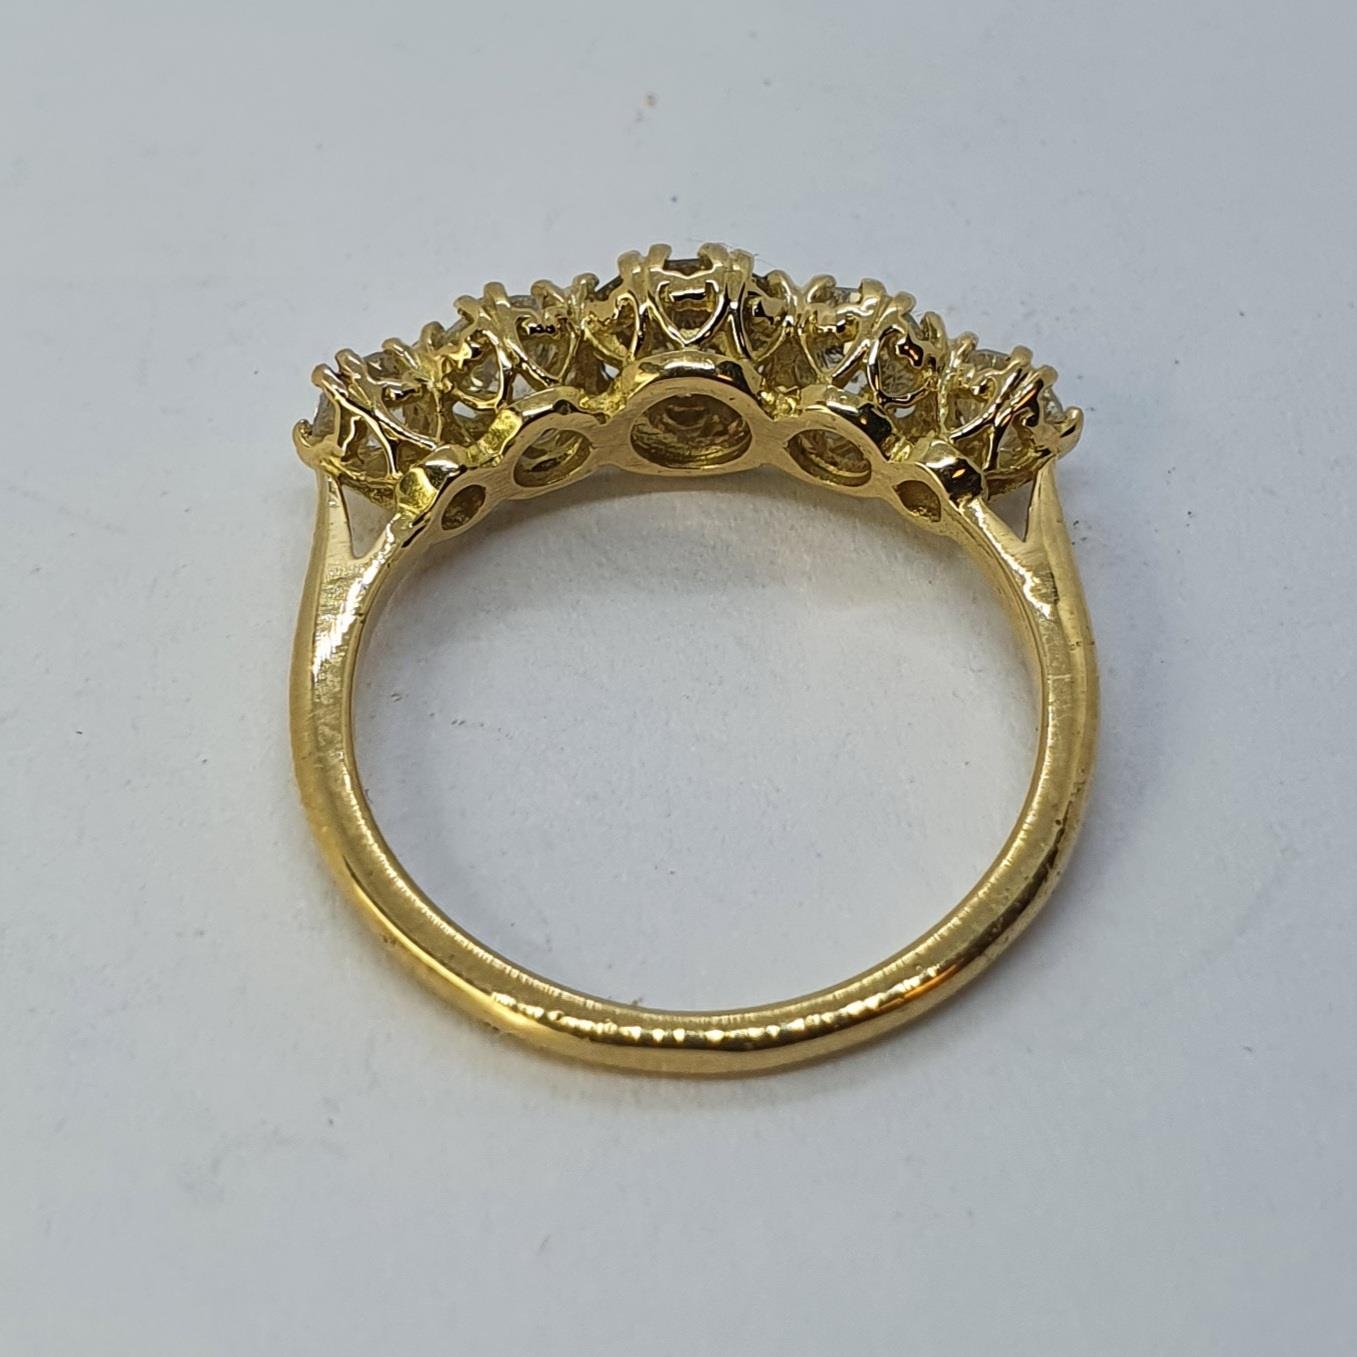 An 18ct gold and five stone diamond ring, ring size K Diamond weight 1.59ct approx. with the - Image 4 of 4